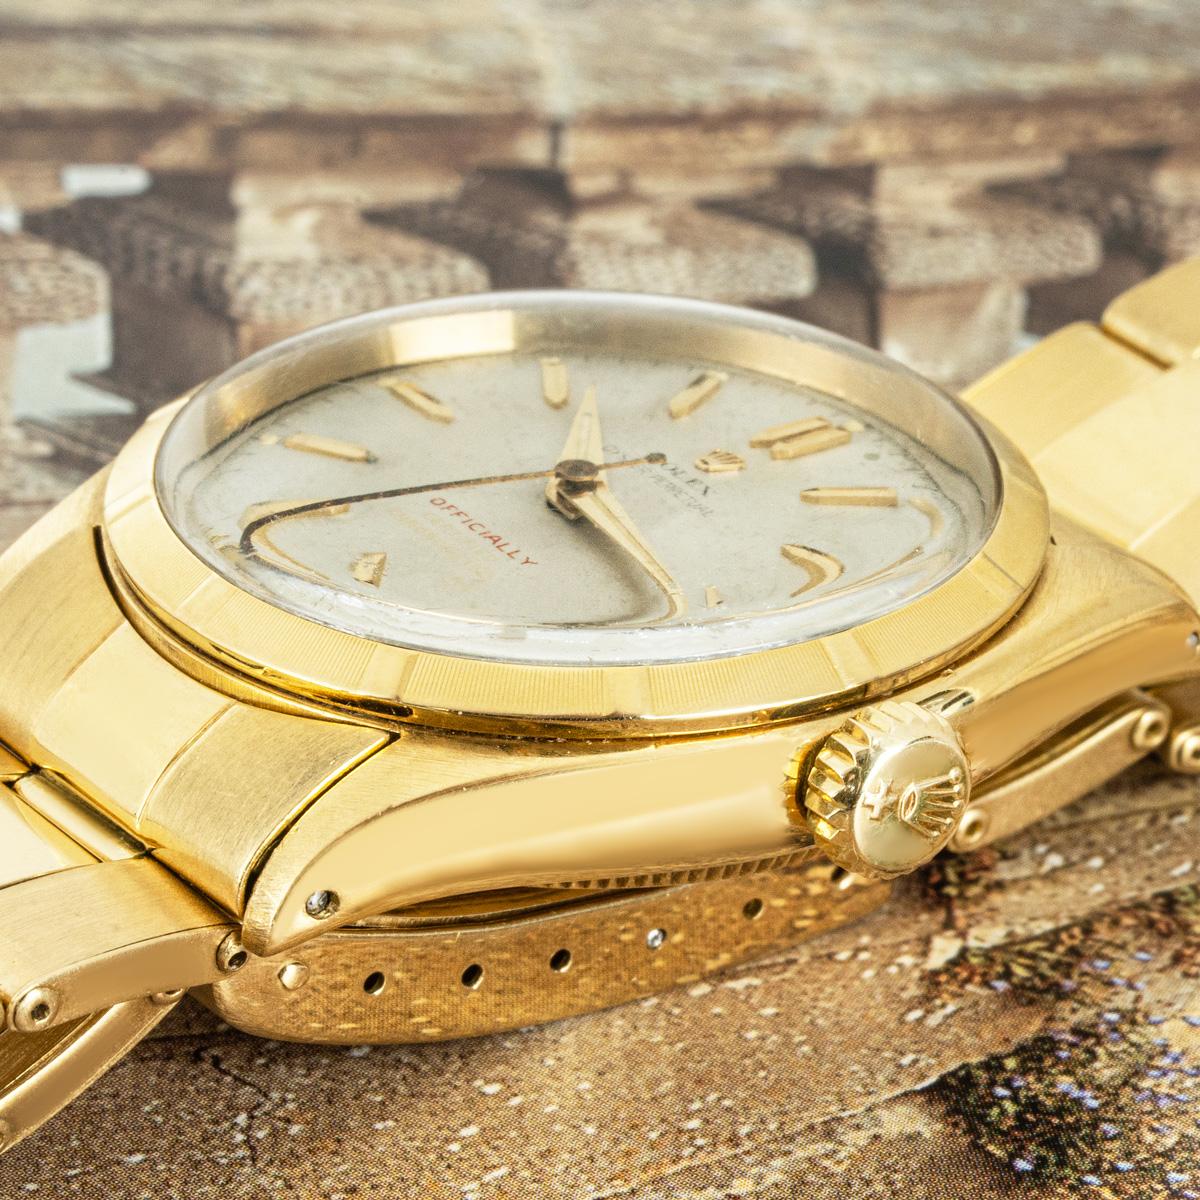 A rare Oyster Perpetual wristwatch in yellow gold by Rolex. Featuring a silver dial with a distinctive 'Officially' in red writing and a yellow gold engine turned bezel. Fitted with a plastic glass and a self-winding automatic movement. The watch is